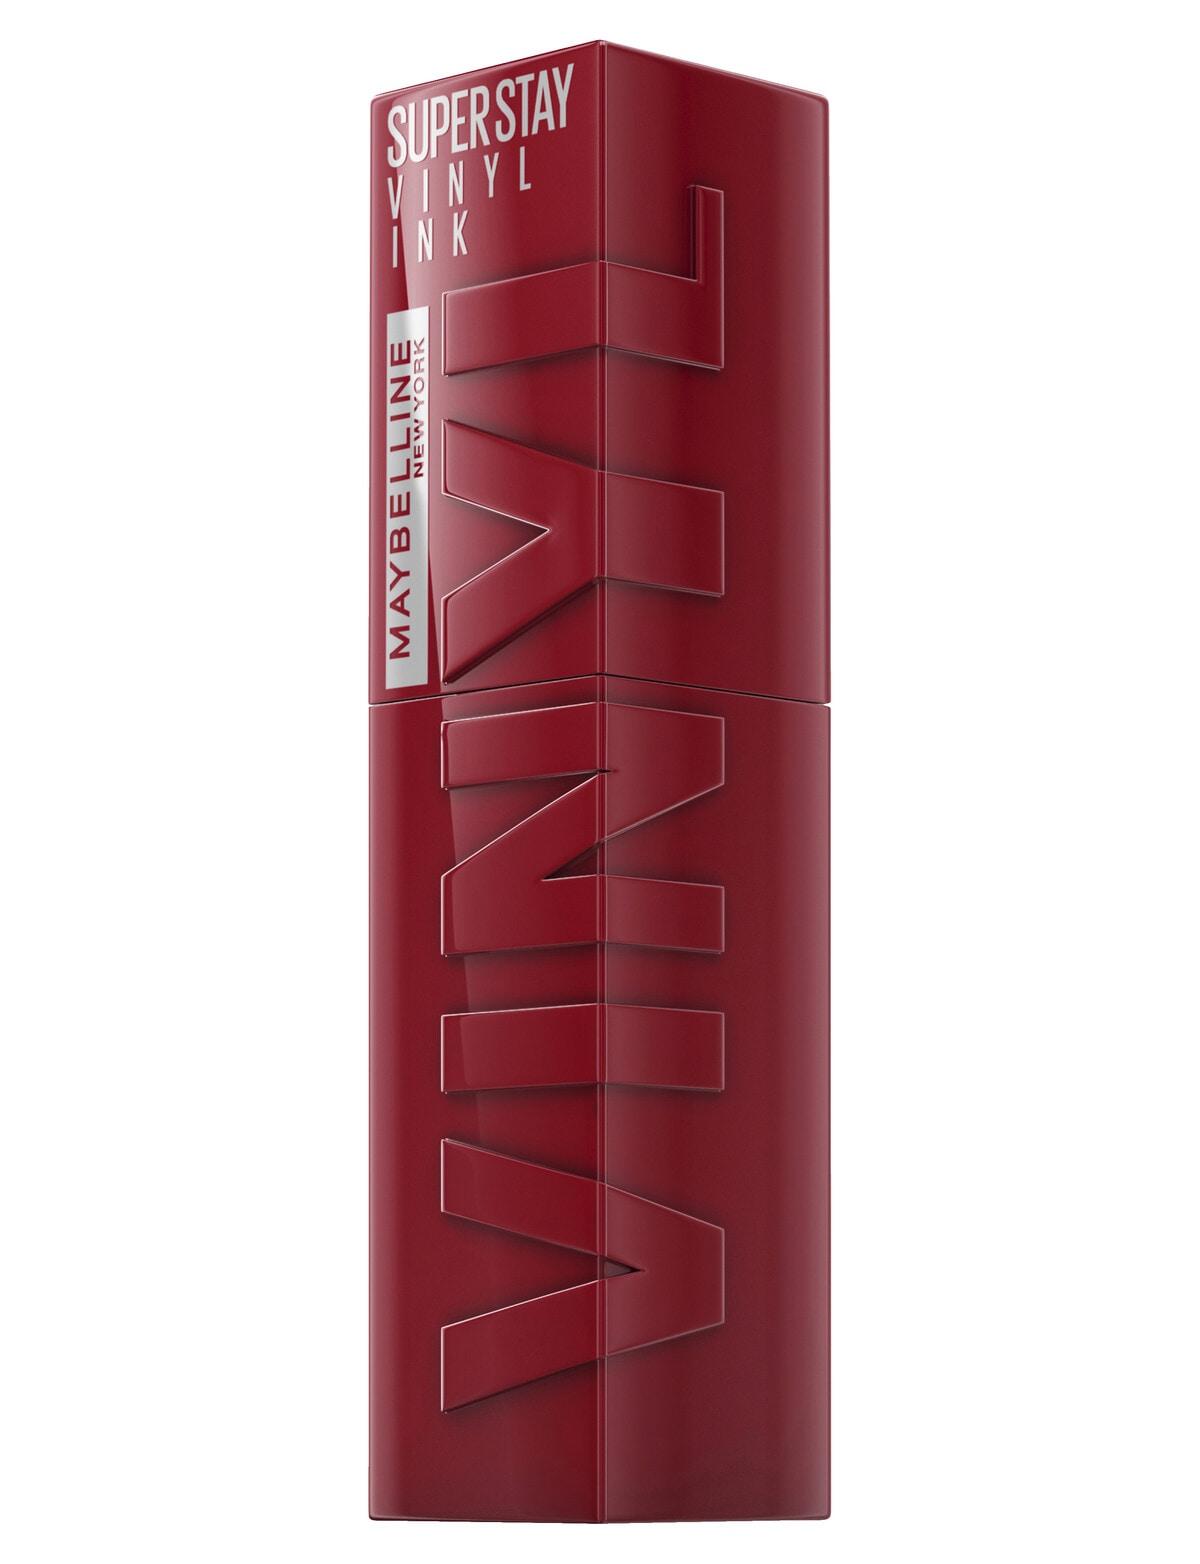 Maybelline SuperStay Vinyl Ink Liquid Lipstick, Charged 